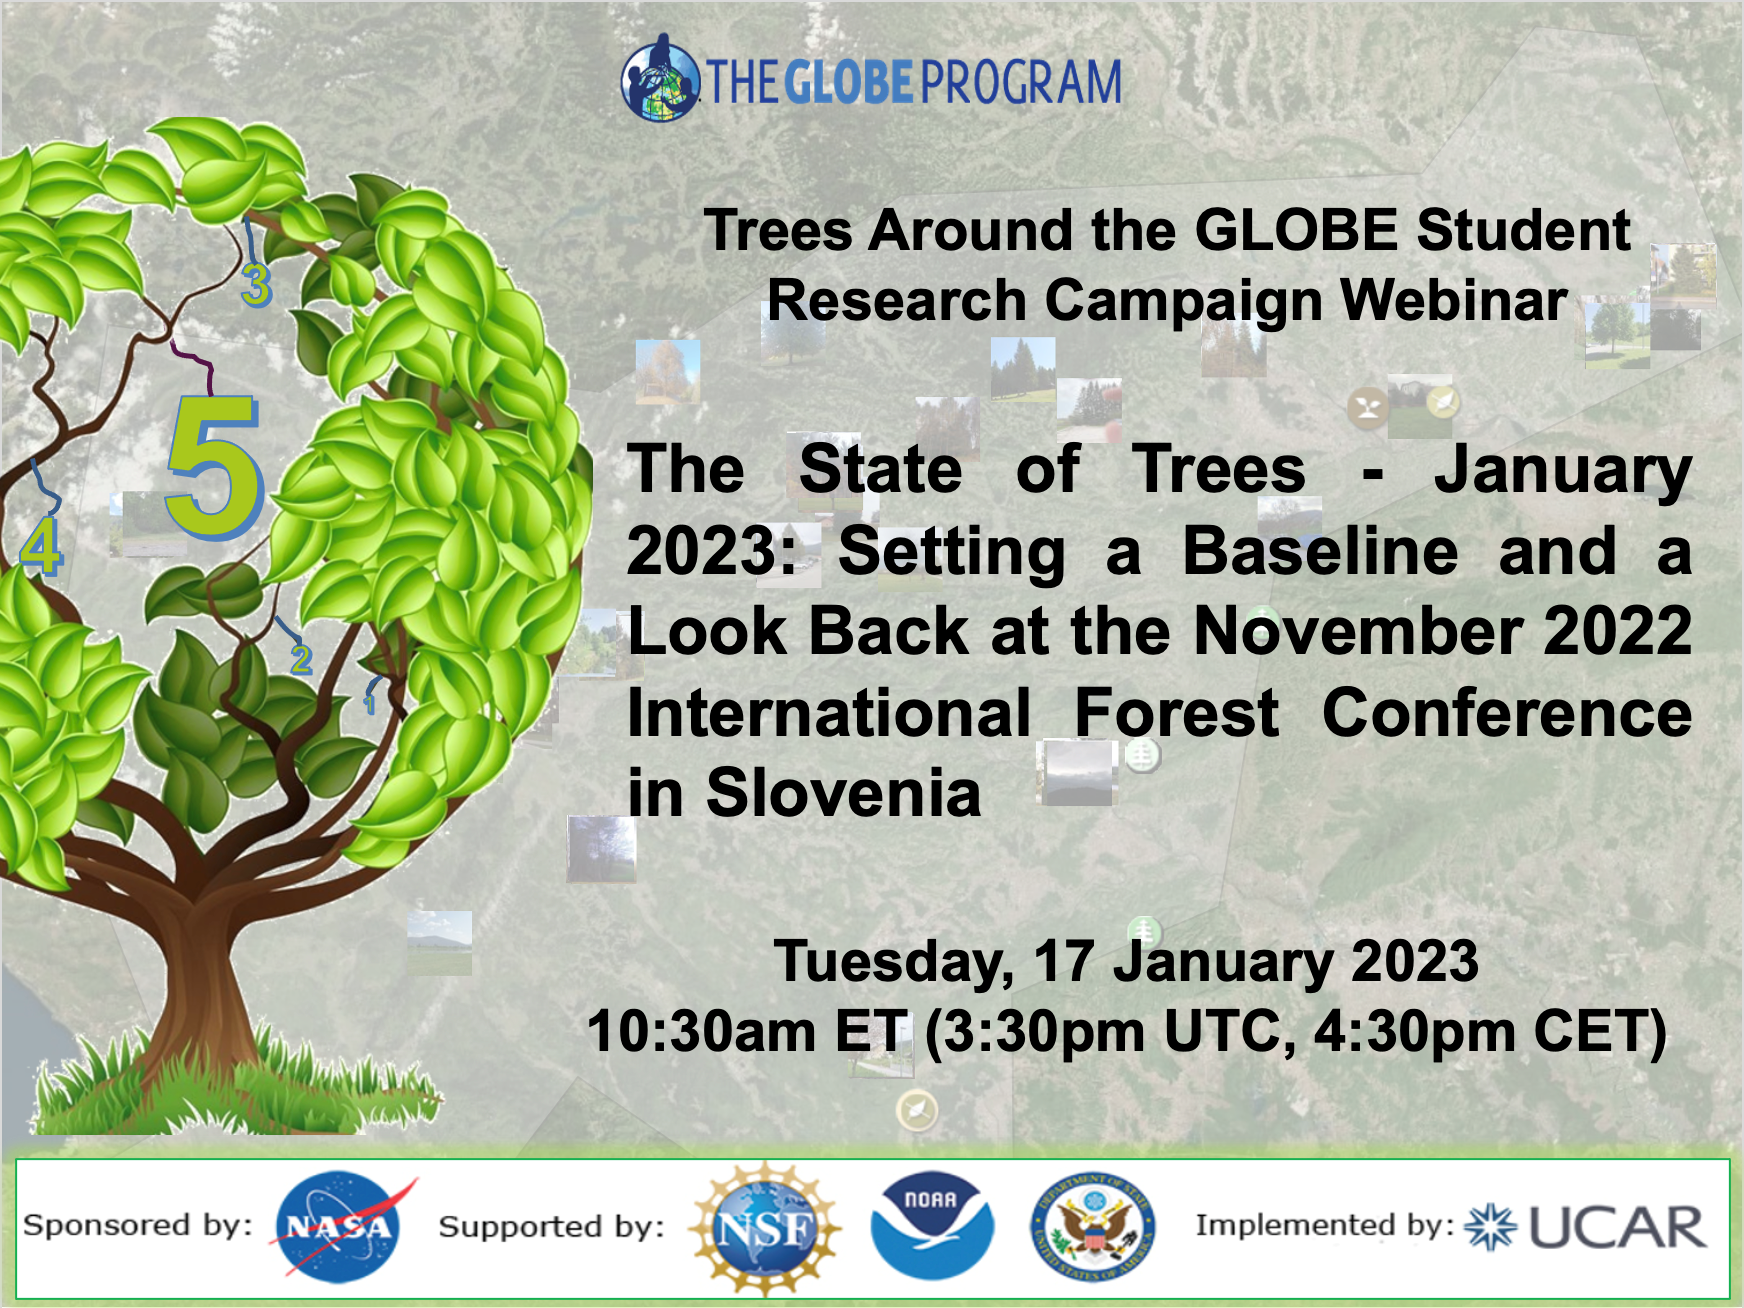 Trees Around the GLOBE 17 January 2023 webinar shareable, showing the time and date and title of the event